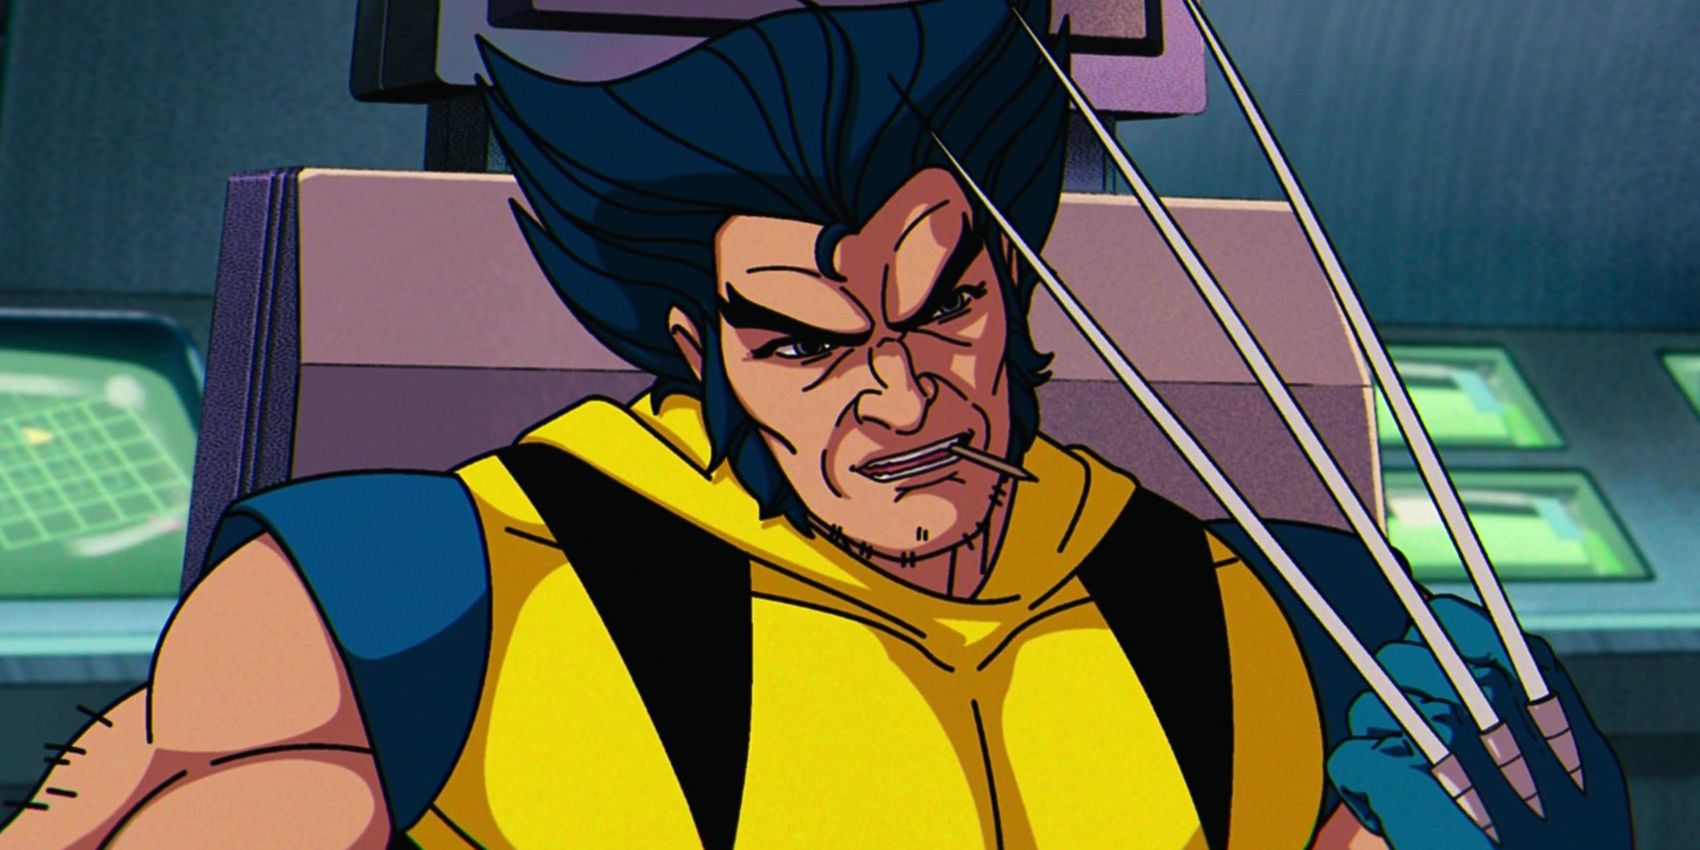 Wolverine shows his claws while clenching his teeth in X-Men '97